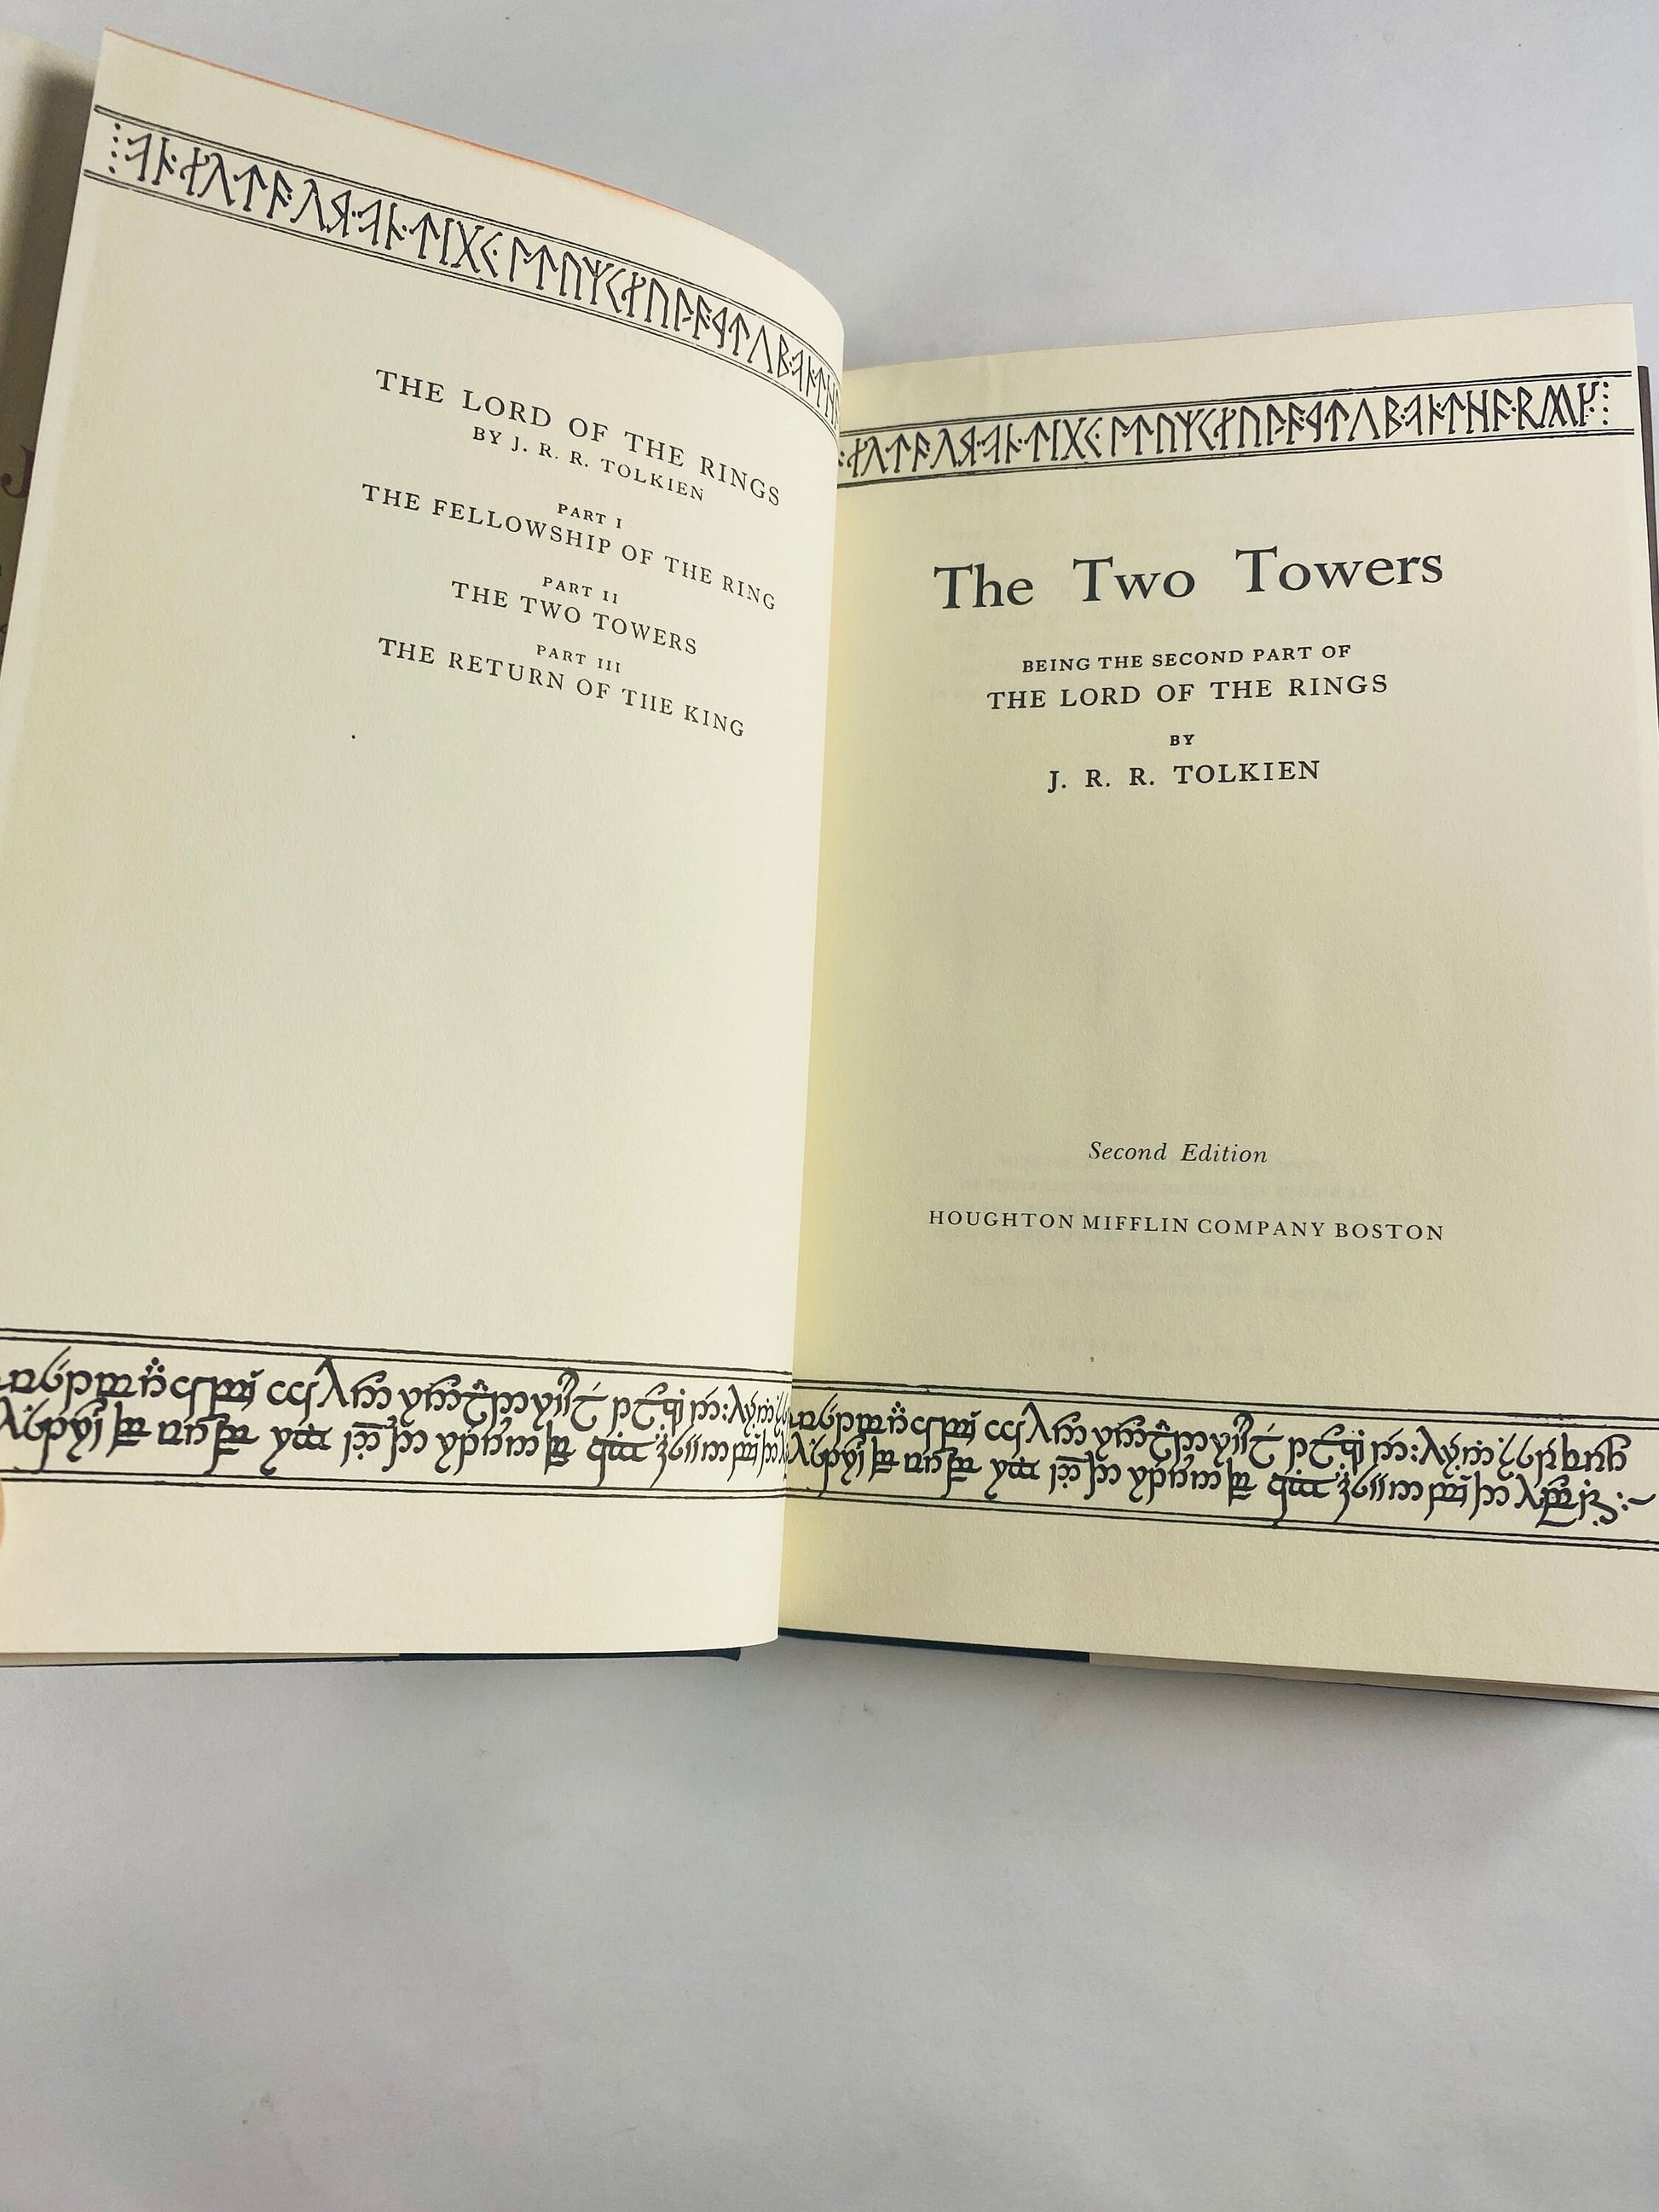 1967 Tolkien Two Towers Lord of the Rings vintage Black SECOND EDITION book Lord of the Rings Trilogy HMCO Two Towers